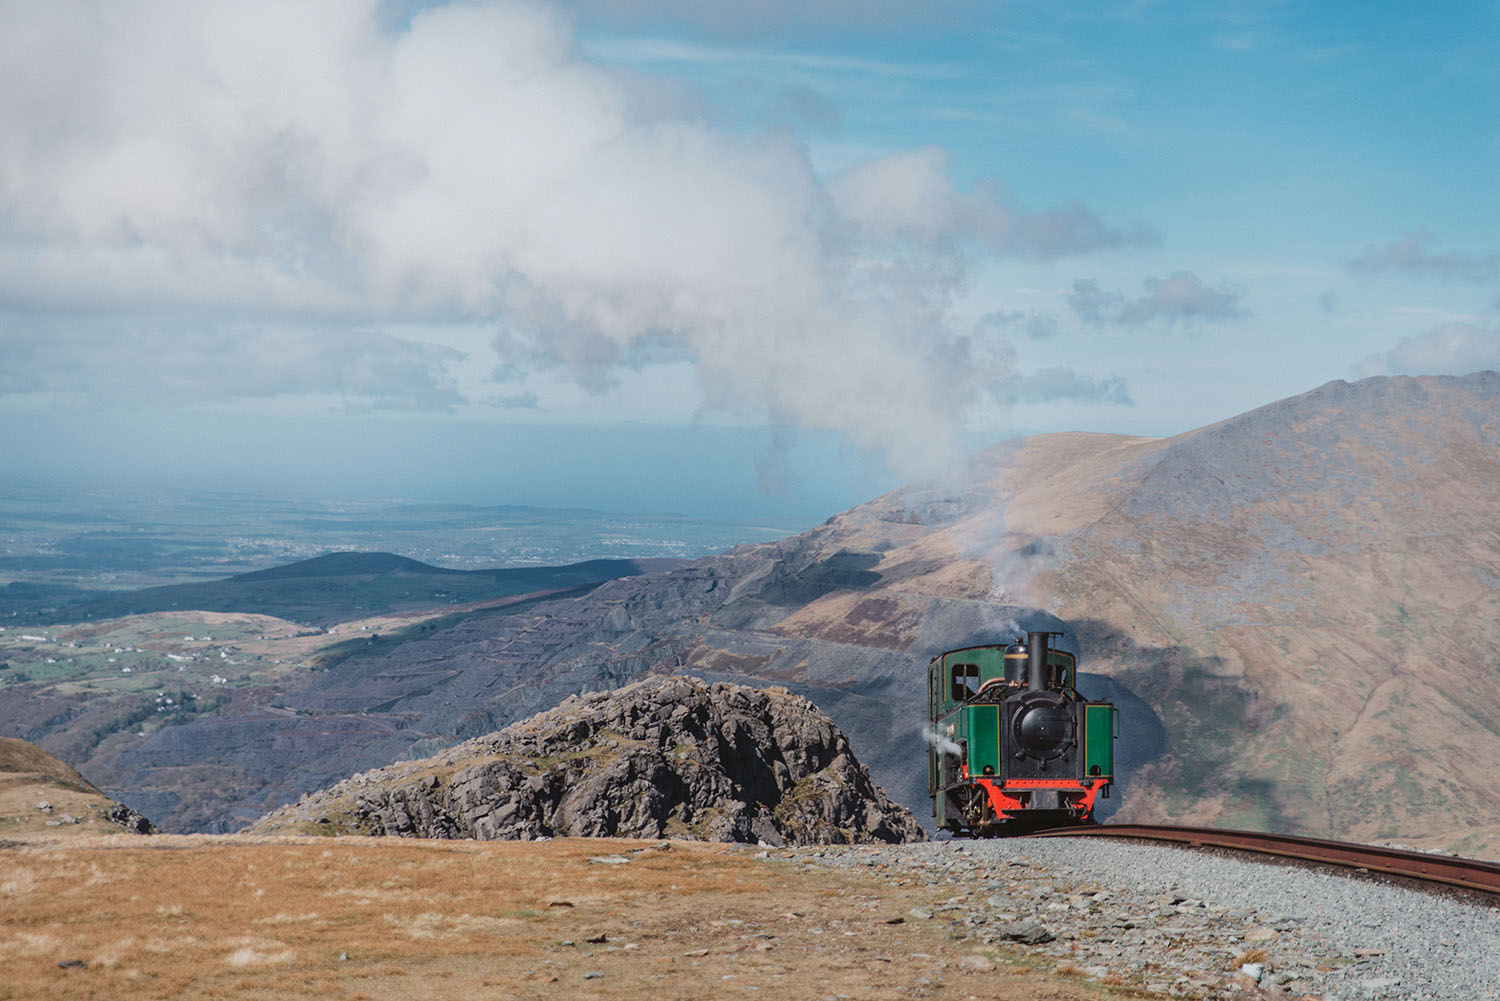 Steam train (Snowdon Mountain Railway) coming up Clogwyn, in Snowdonia National Park, Wales